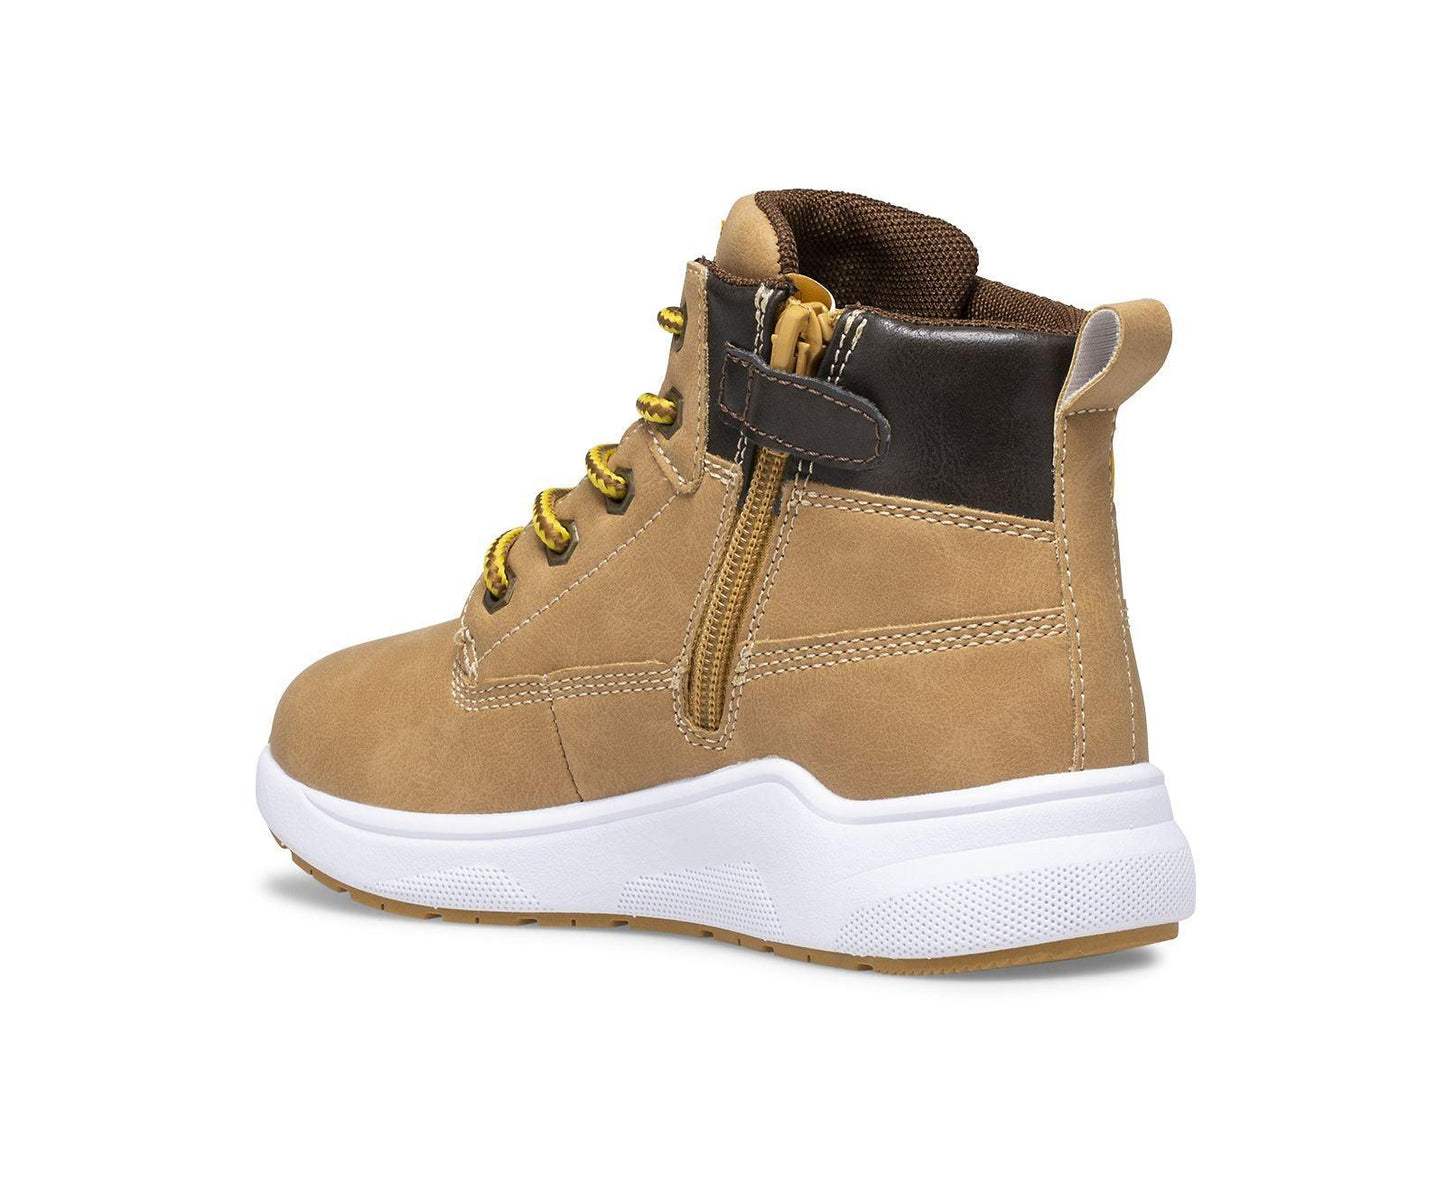 CAT KID'S COLMAX HIGH BOOT - CAMEL - Activ Abou Alaa